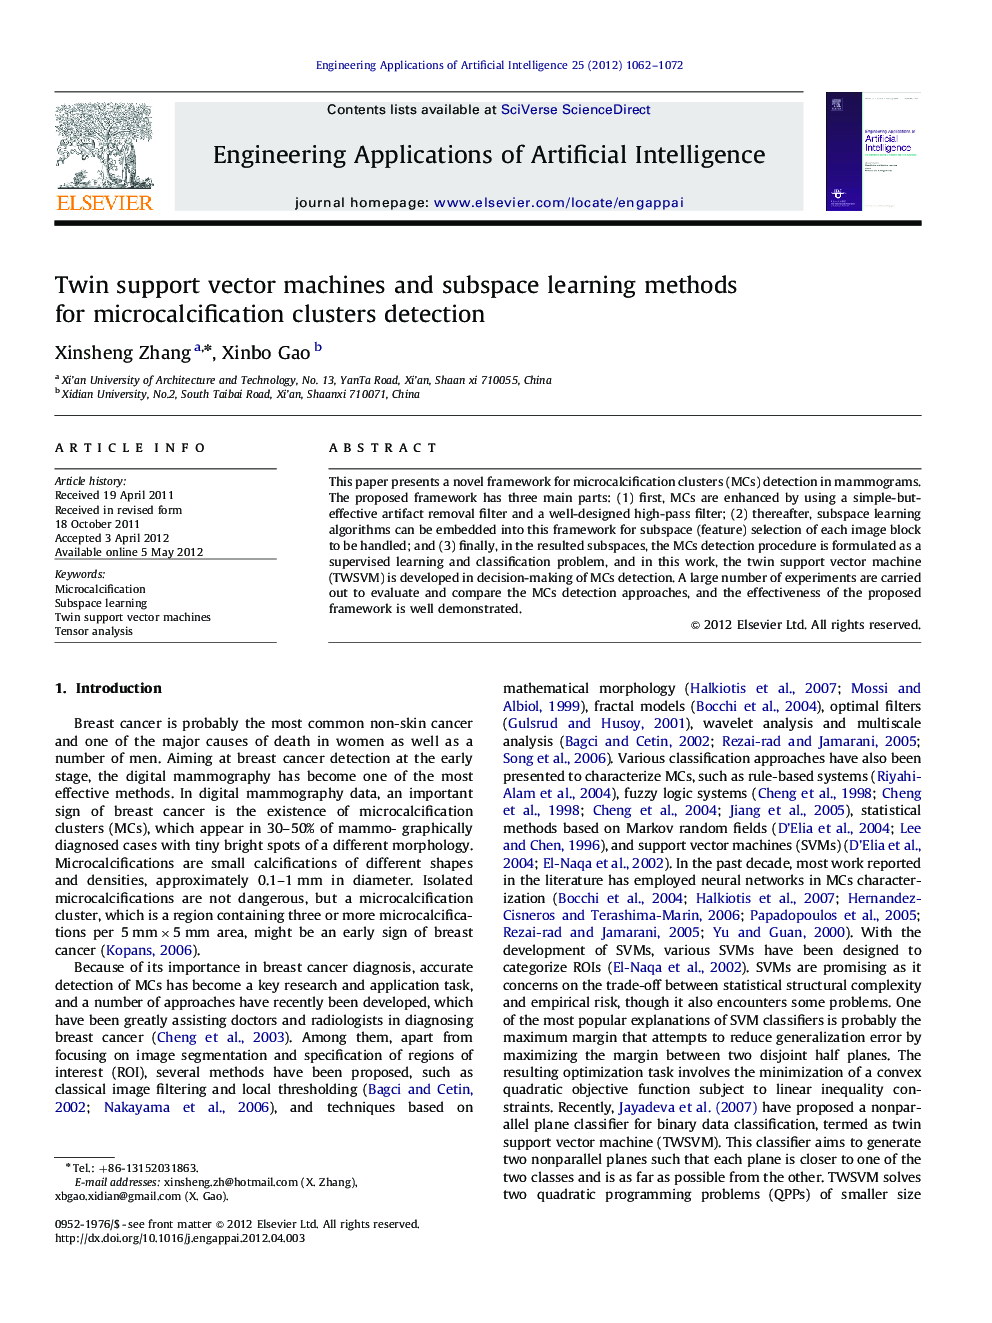 Twin support vector machines and subspace learning methods for microcalcification clusters detection